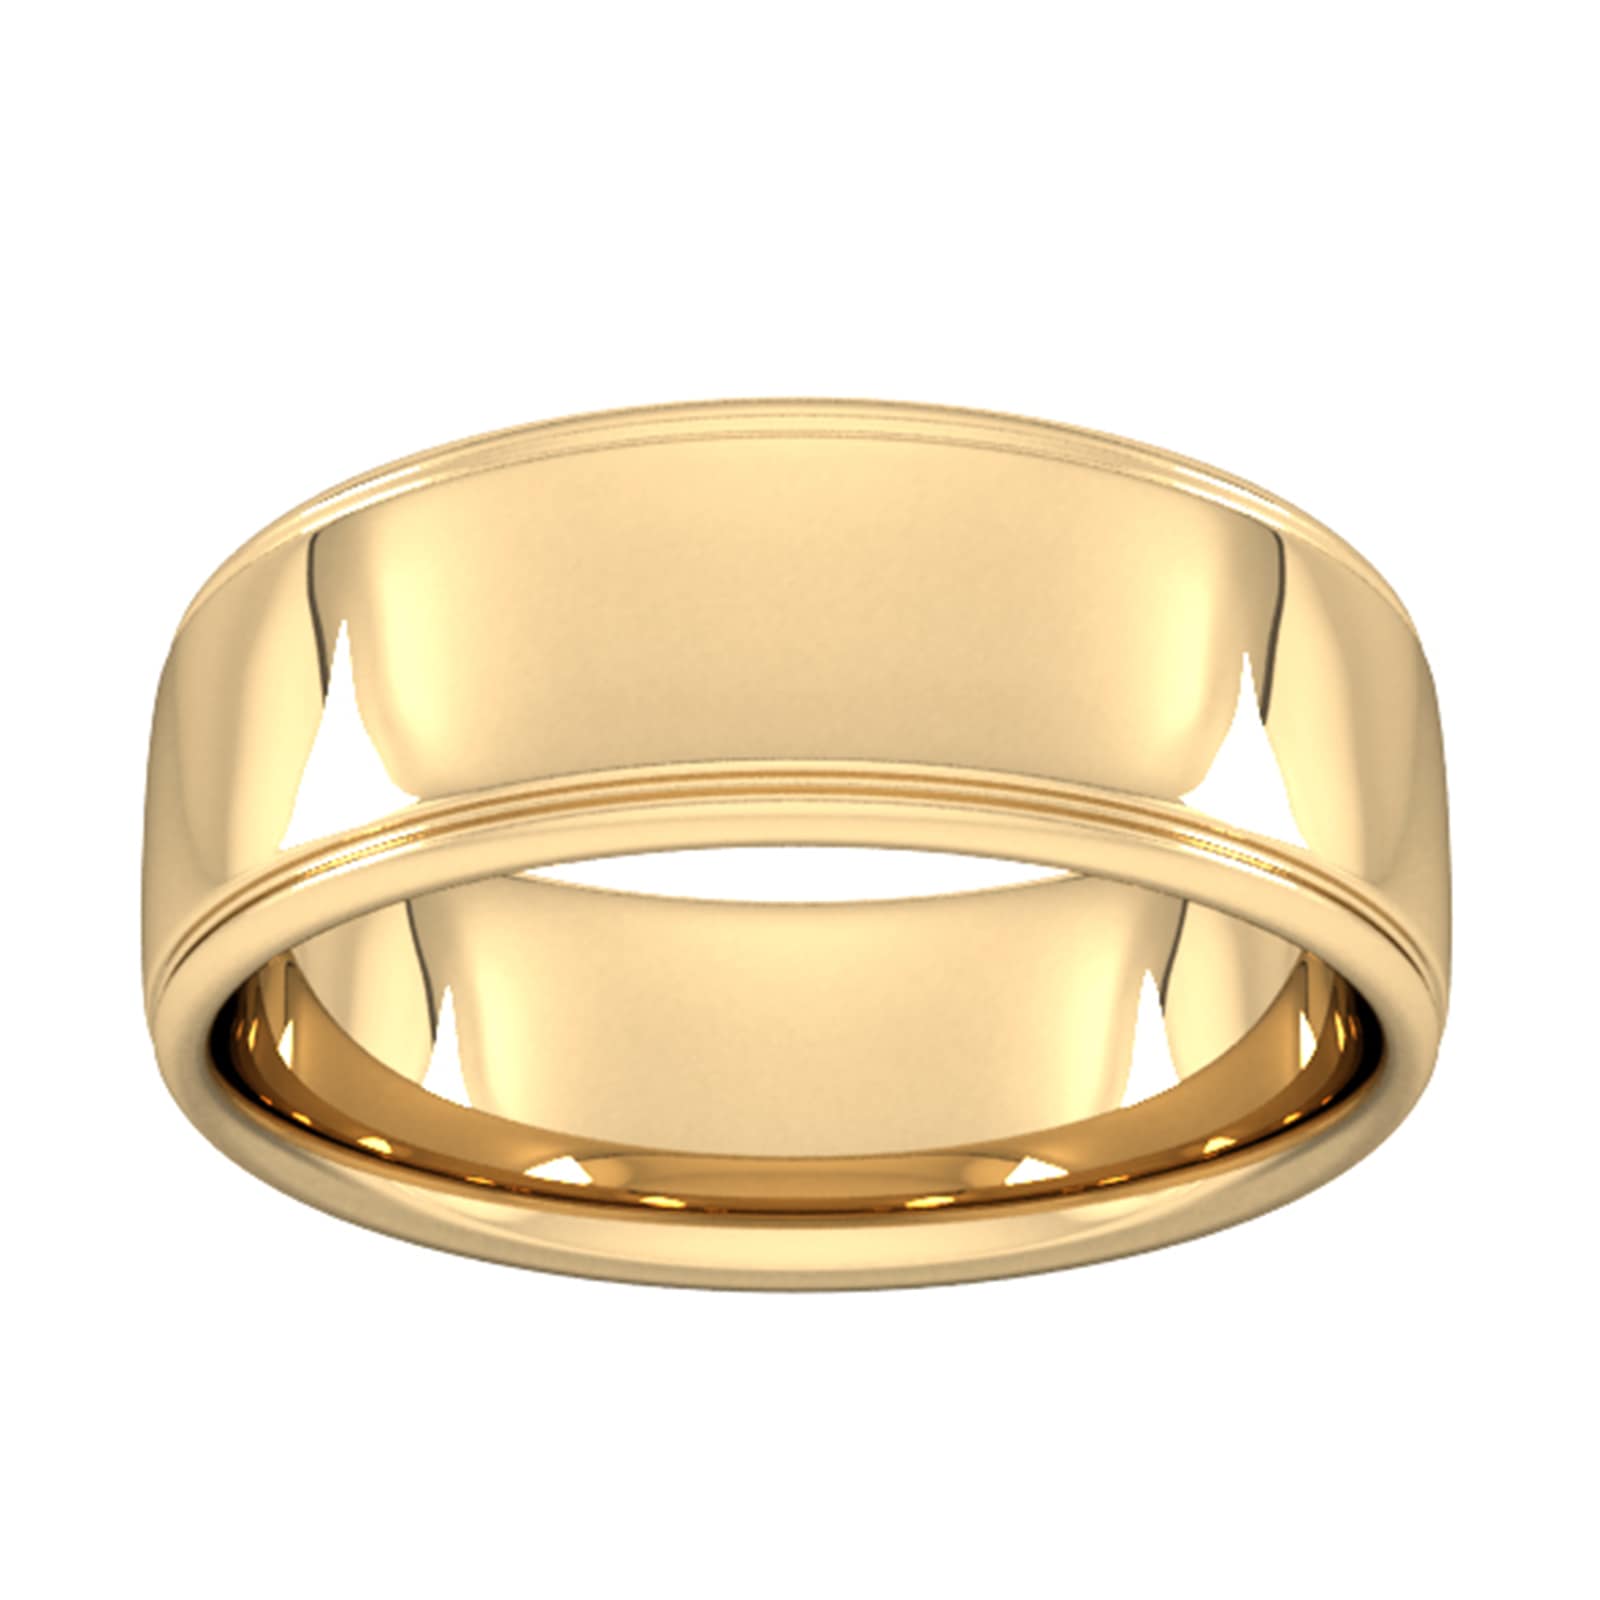 8mm D Shape Heavy Polished Finish With Grooves Wedding Ring In 18 Carat Yellow Gold - Ring Size S